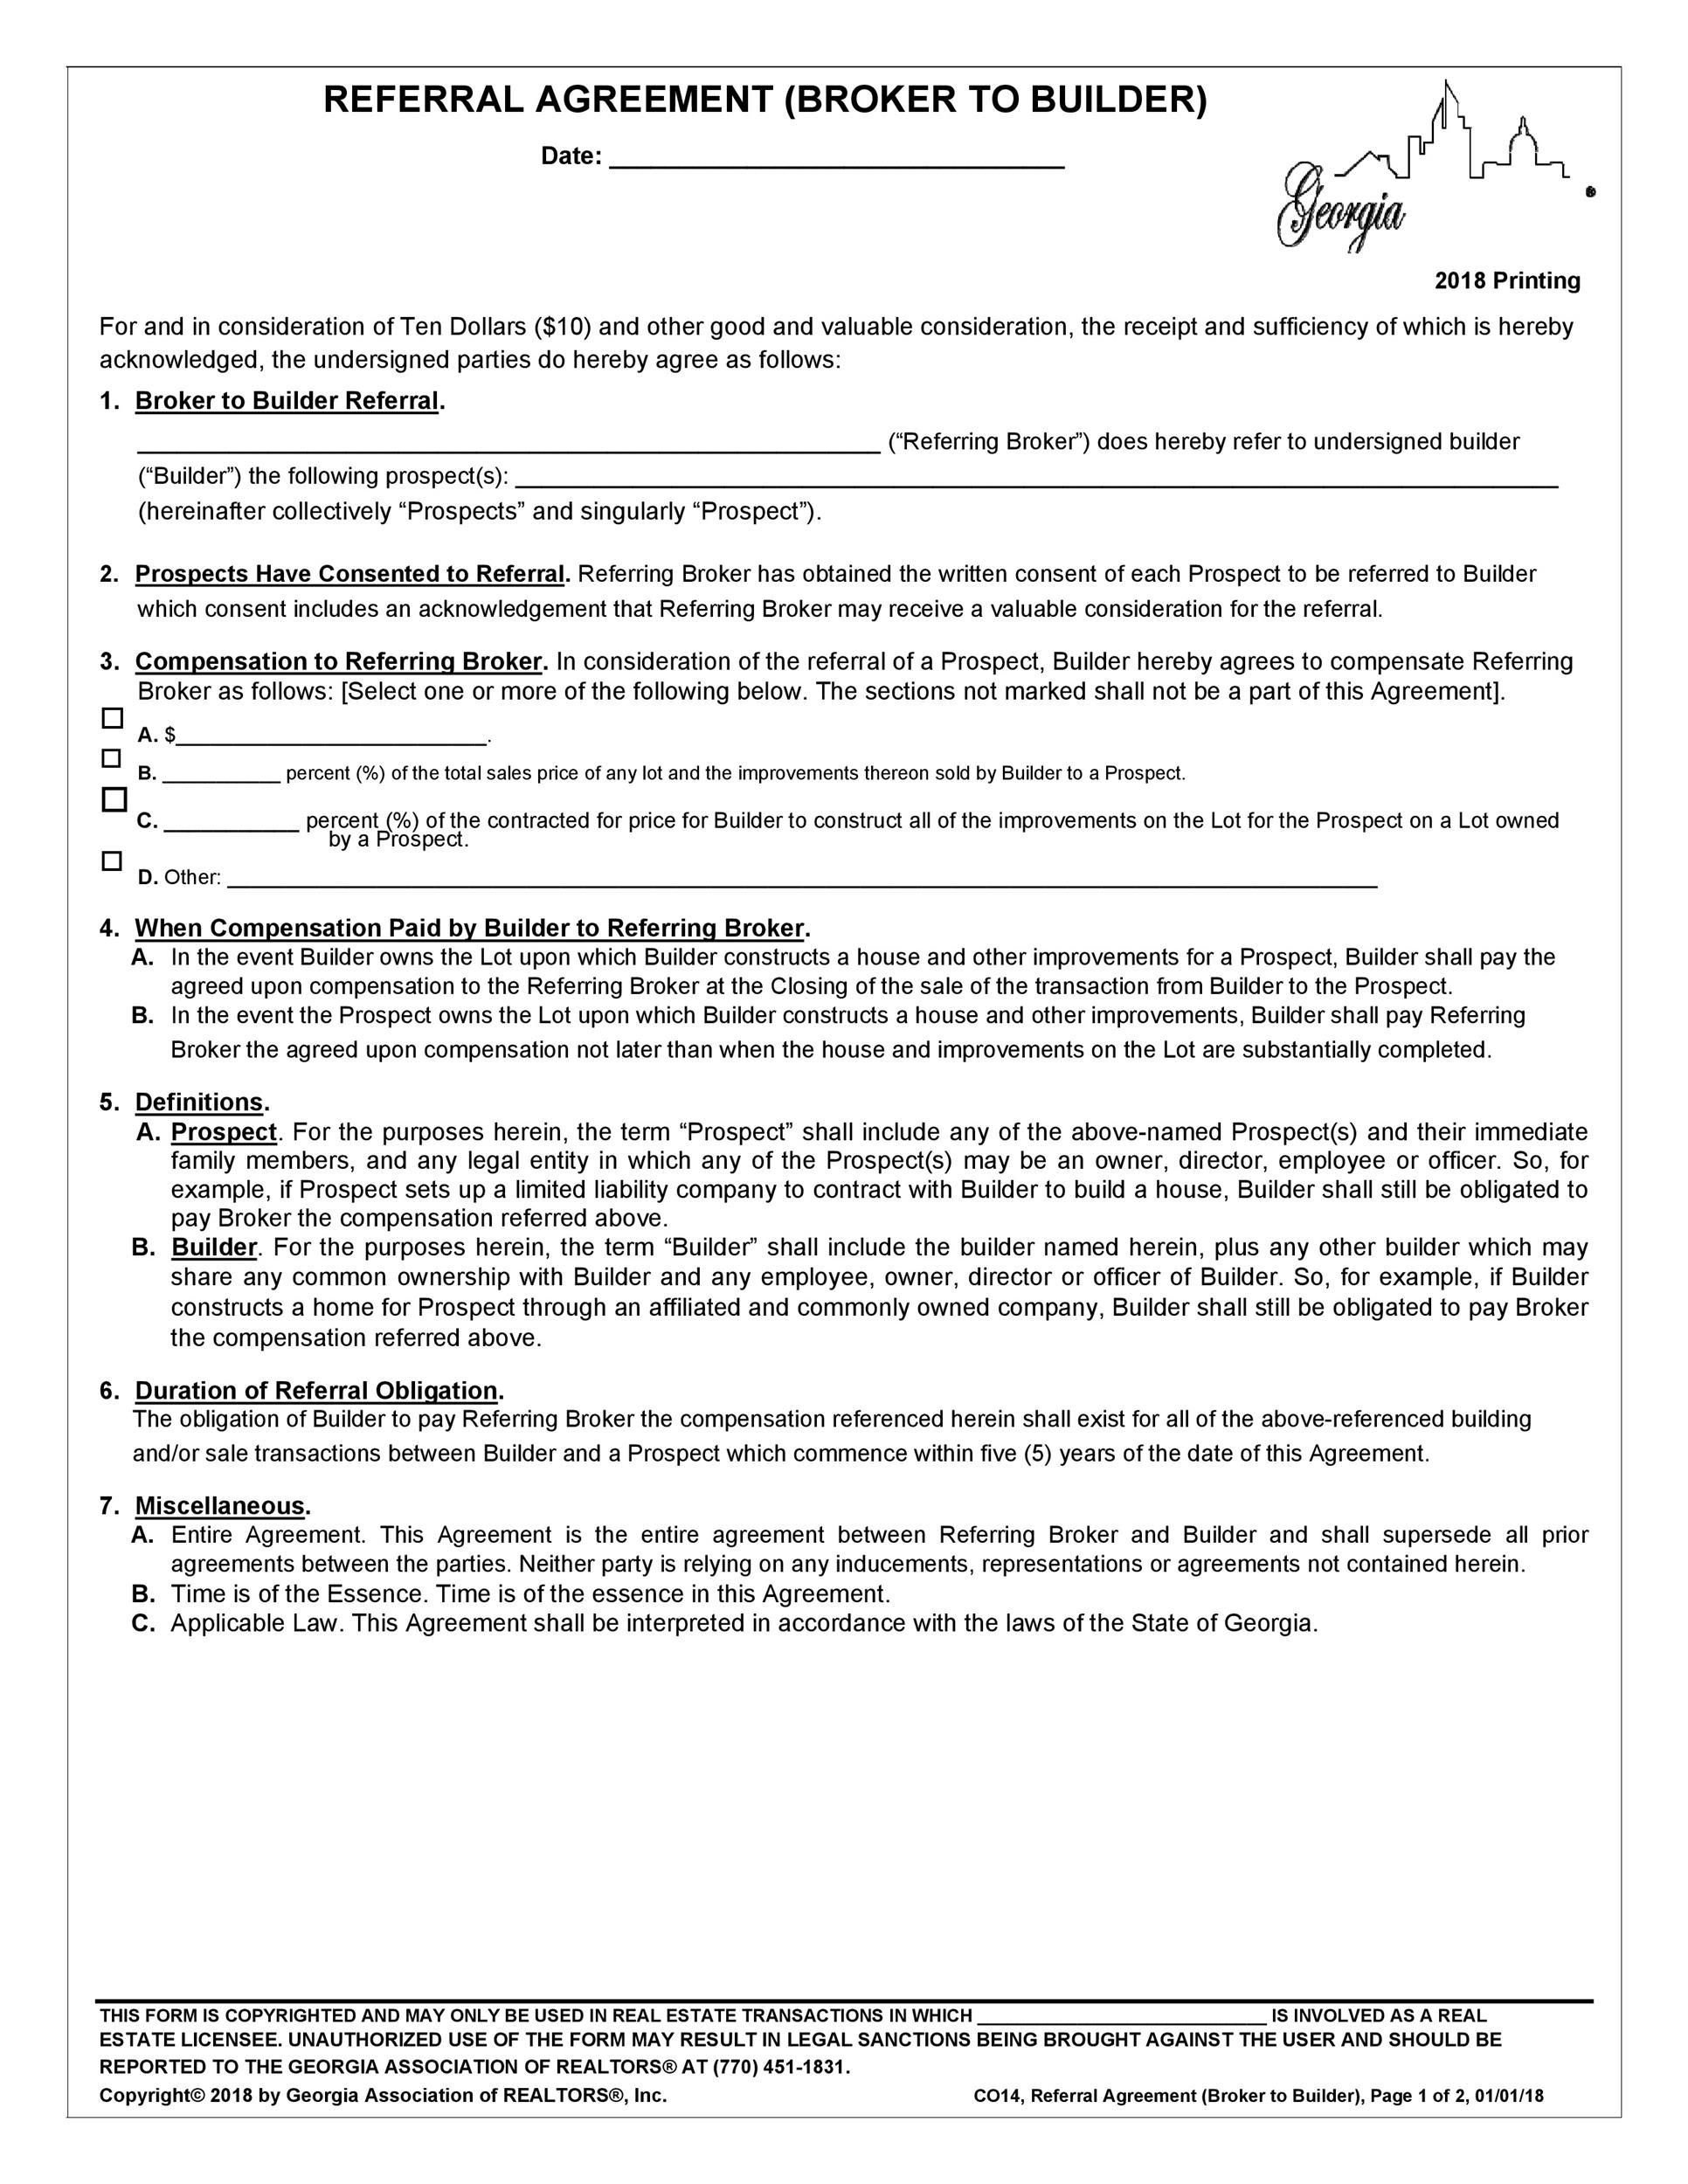 Free referral agreement template 21